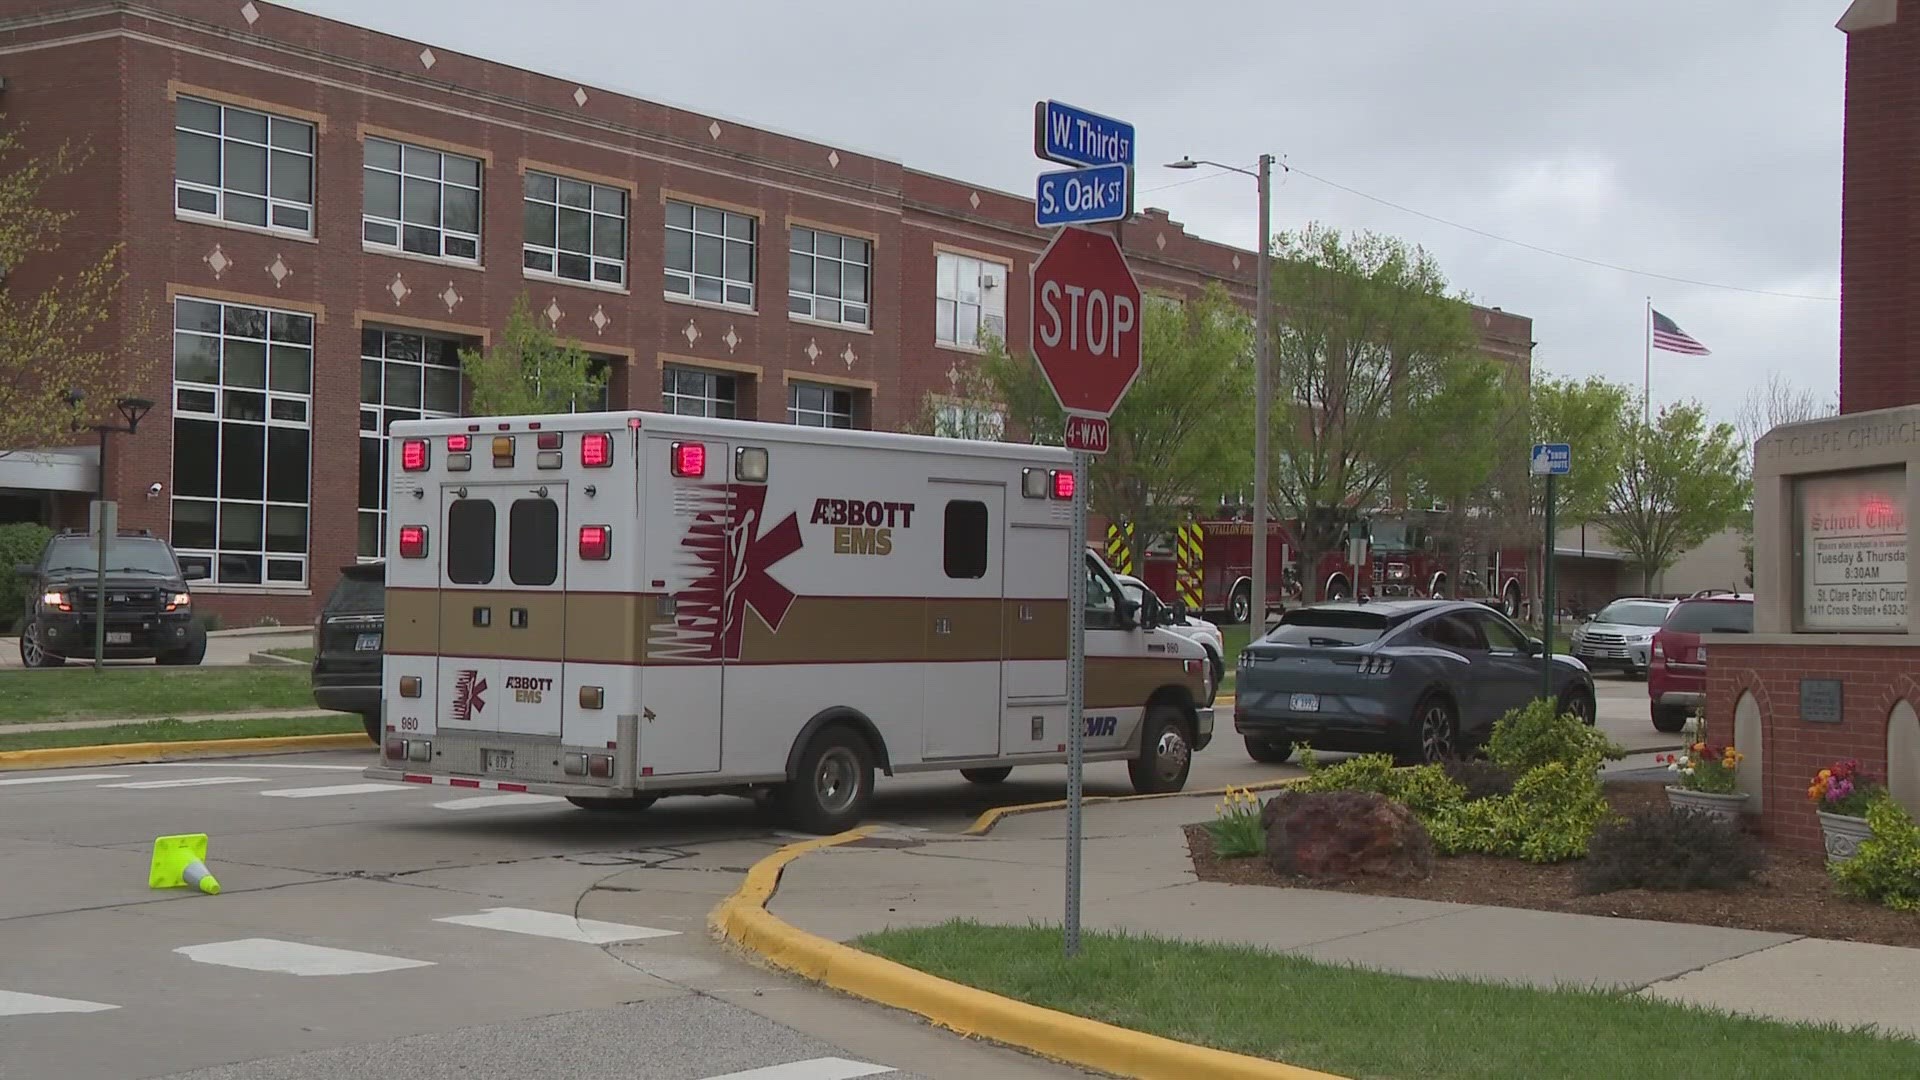 Nearly a dozen students were sent to the hospital last week after what officials first believed was a gas leak at the school.